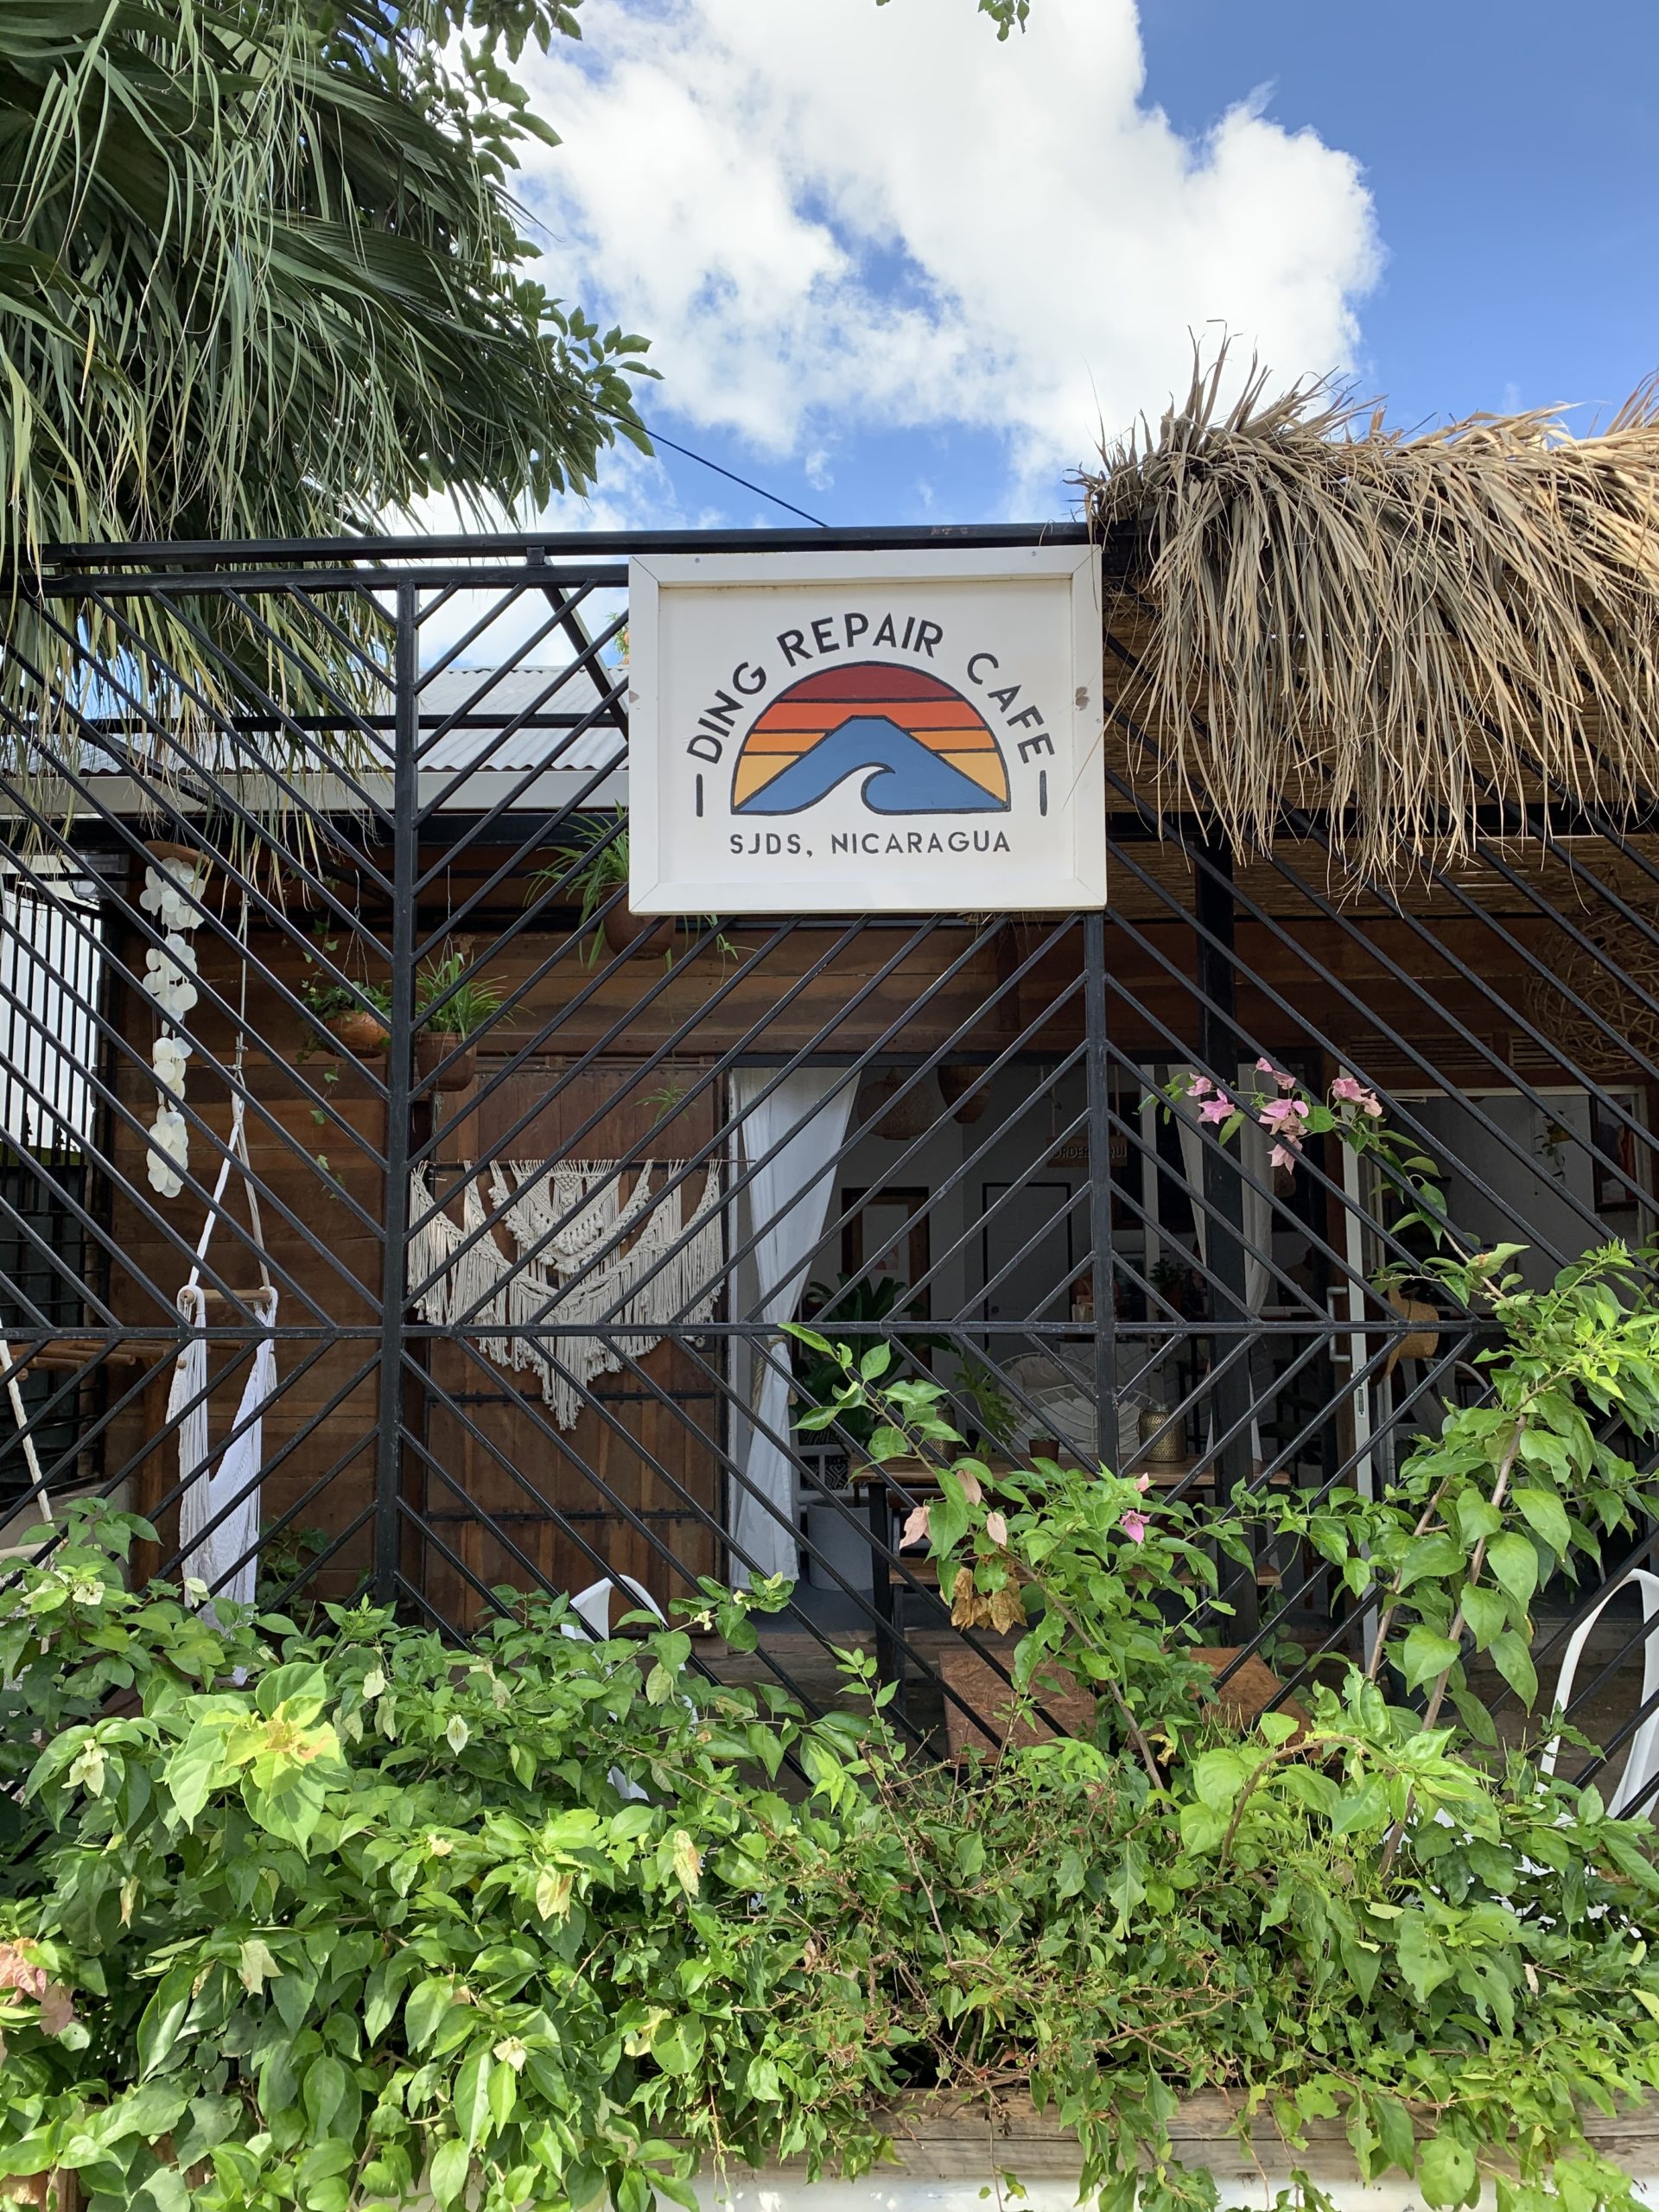 Ding Repair Cafe in Nicaragua, the headquarters for Mikayla Mott's hurricane relief effort.